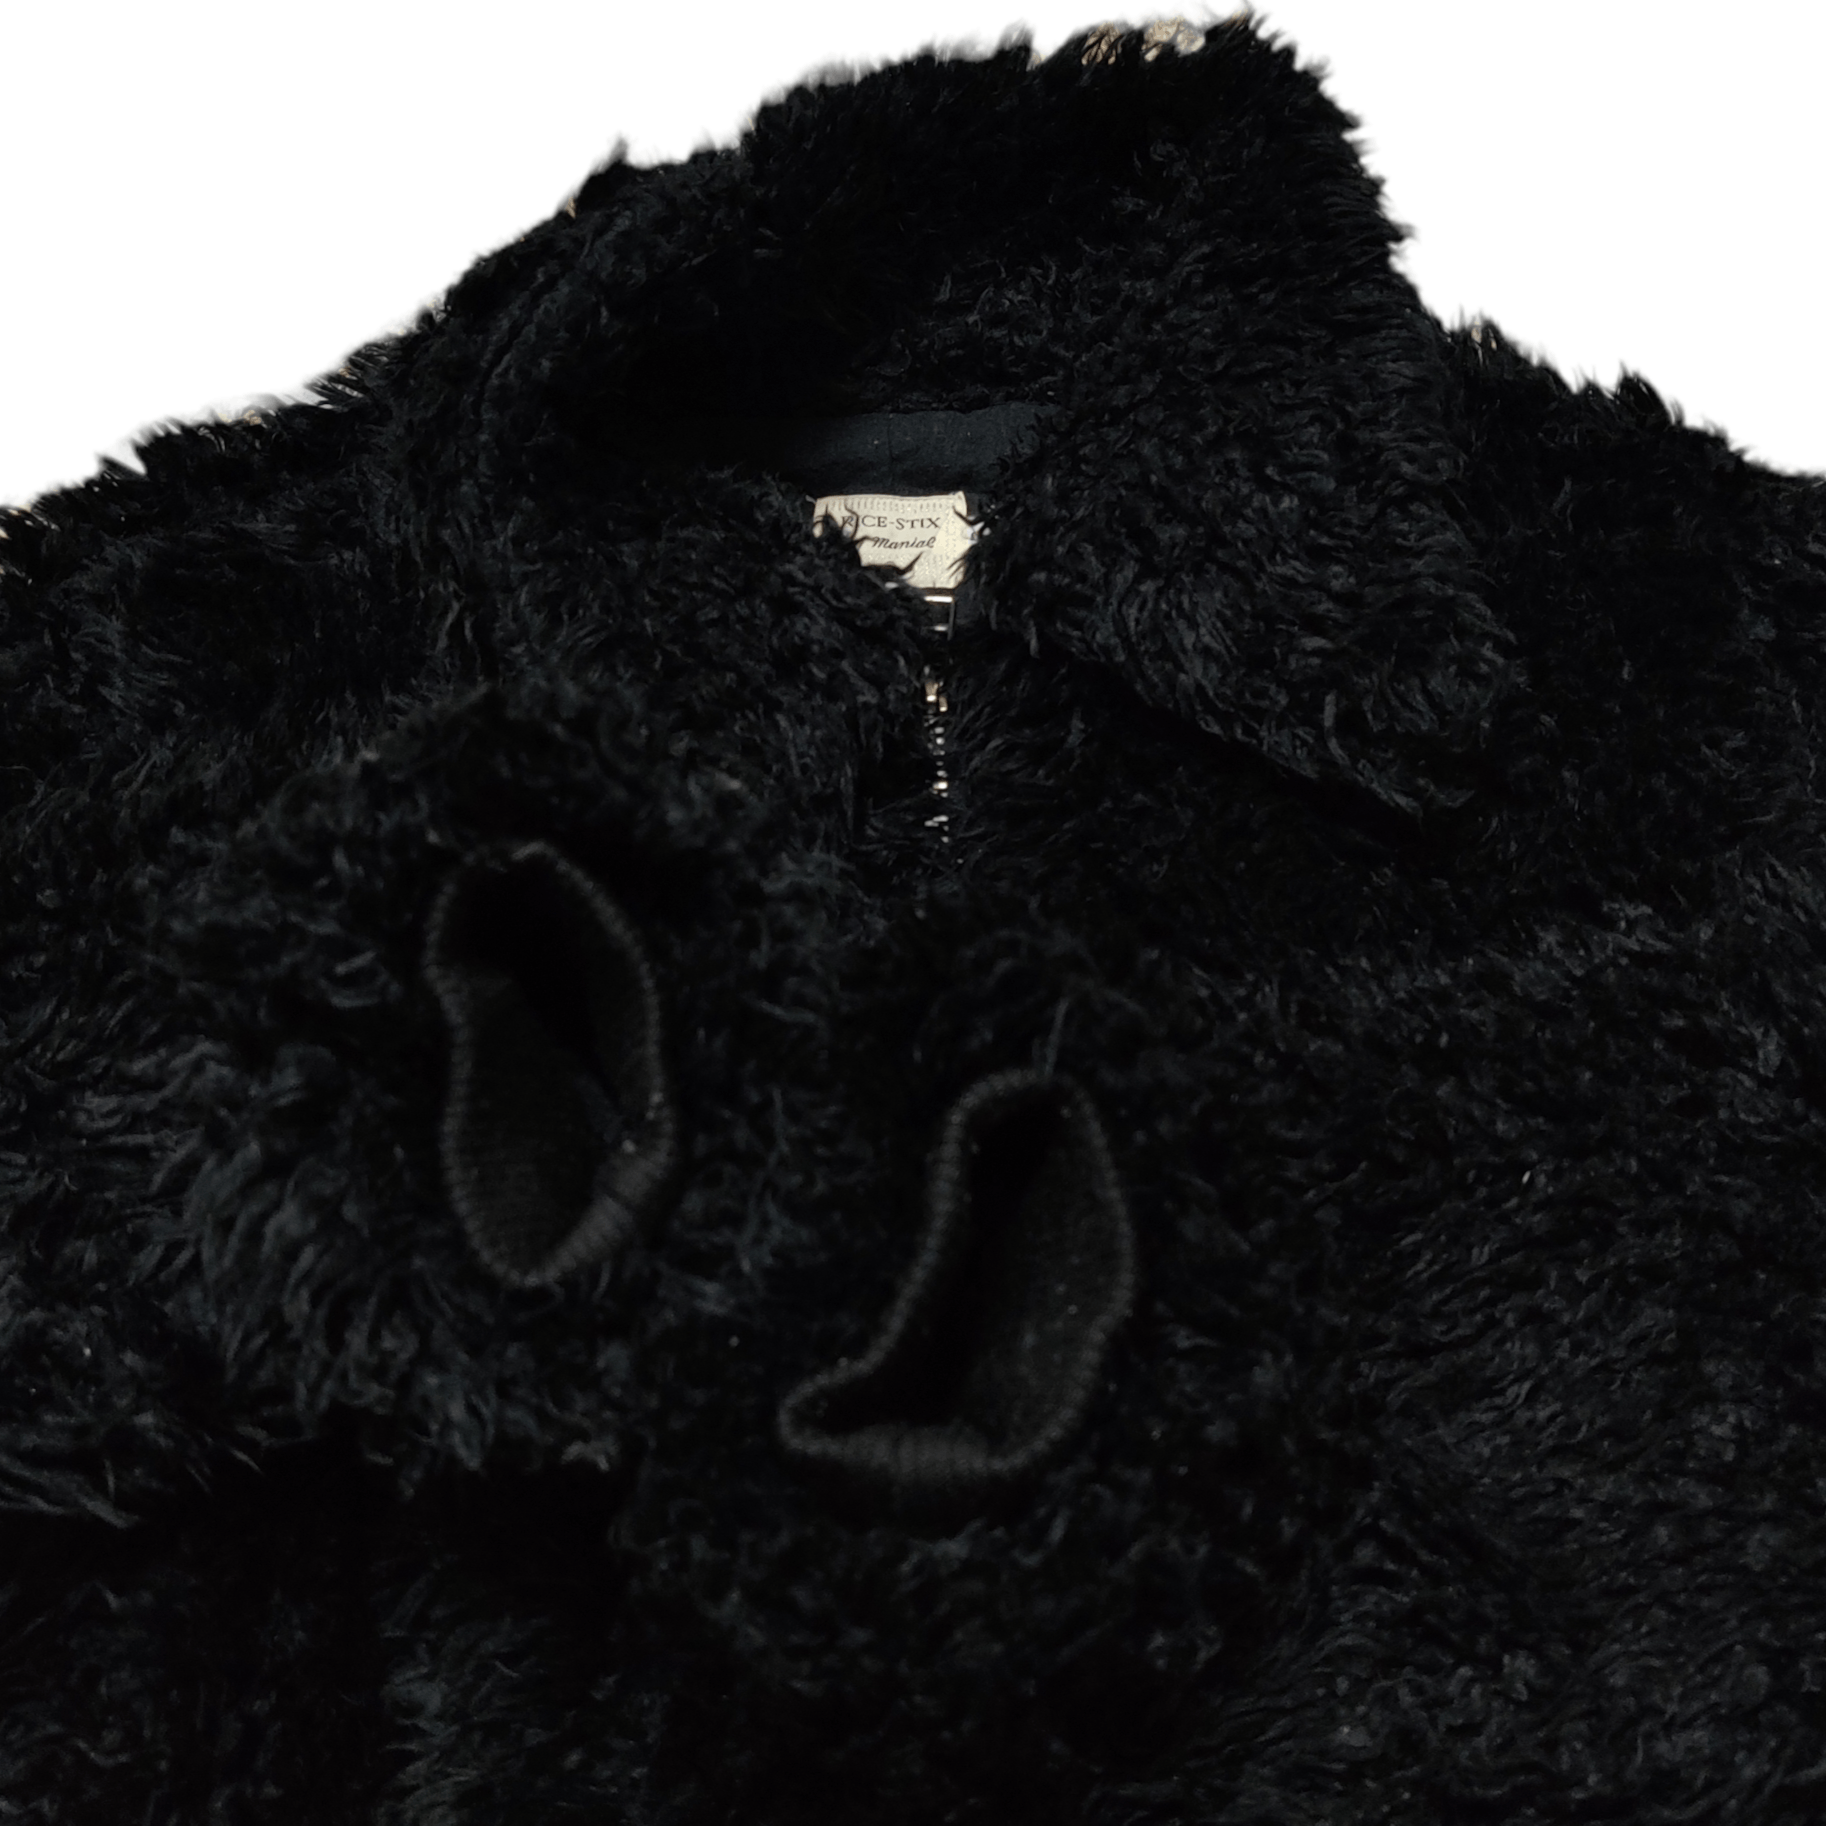 Archival Clothing - Vintage Japanese Brand Rice-Stix by Manial Fur Zip Up - 8